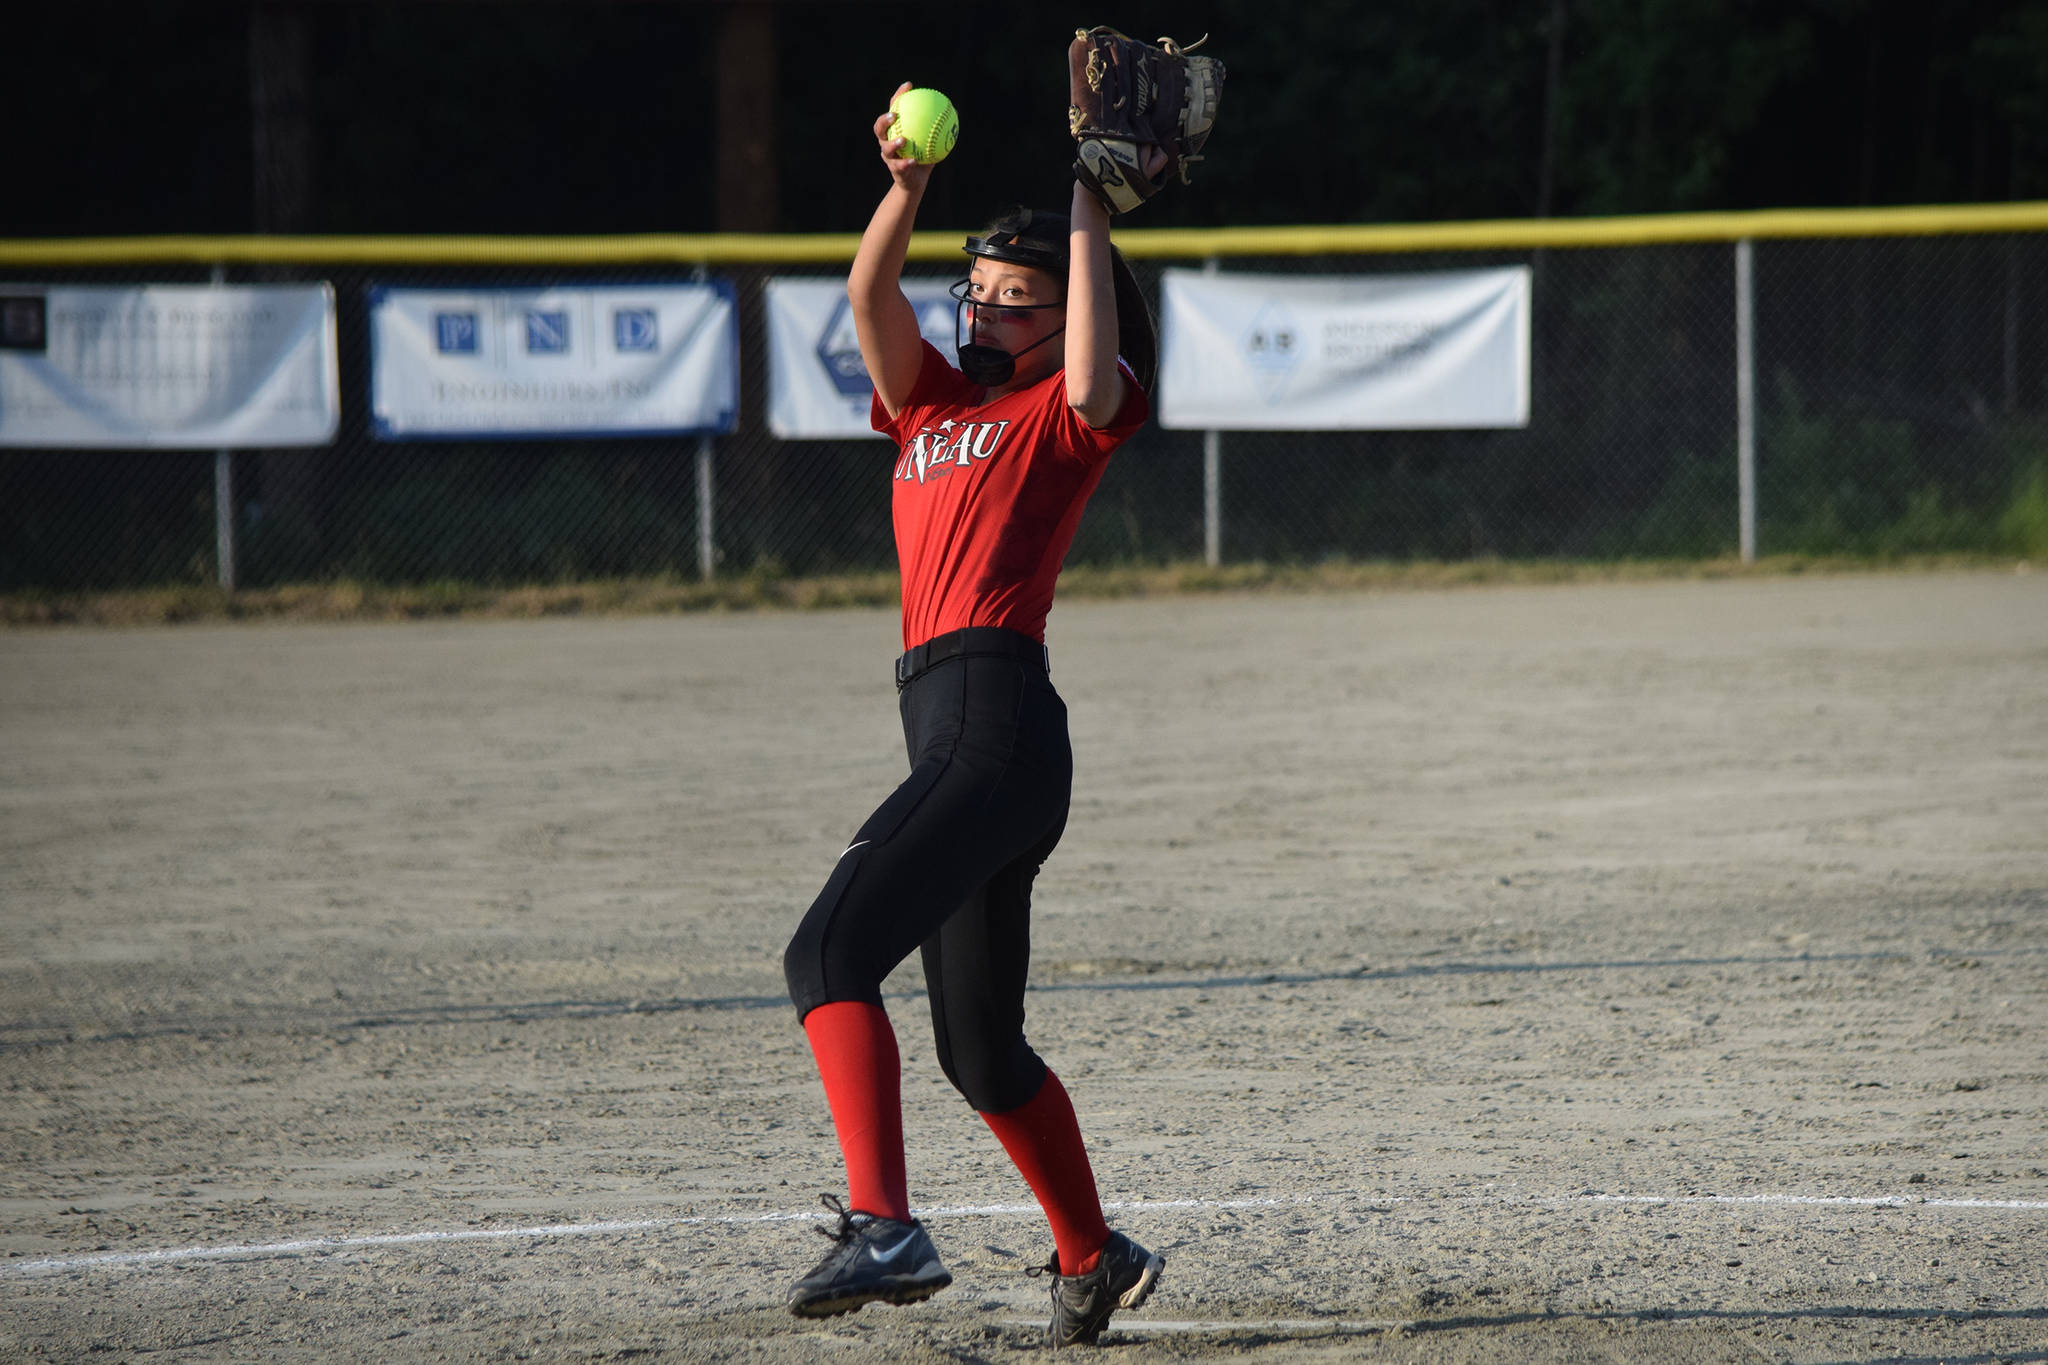 Juneau All-Stars pitcher Kiah Yadao pitches in the first inning against Ketchikan in Game 3 of the Alaska Junior Softball District 2 Tournament at Melvin Park on Wednesday, July 3, 2019. (Nolin Ainsworth | Juneau Empire File)